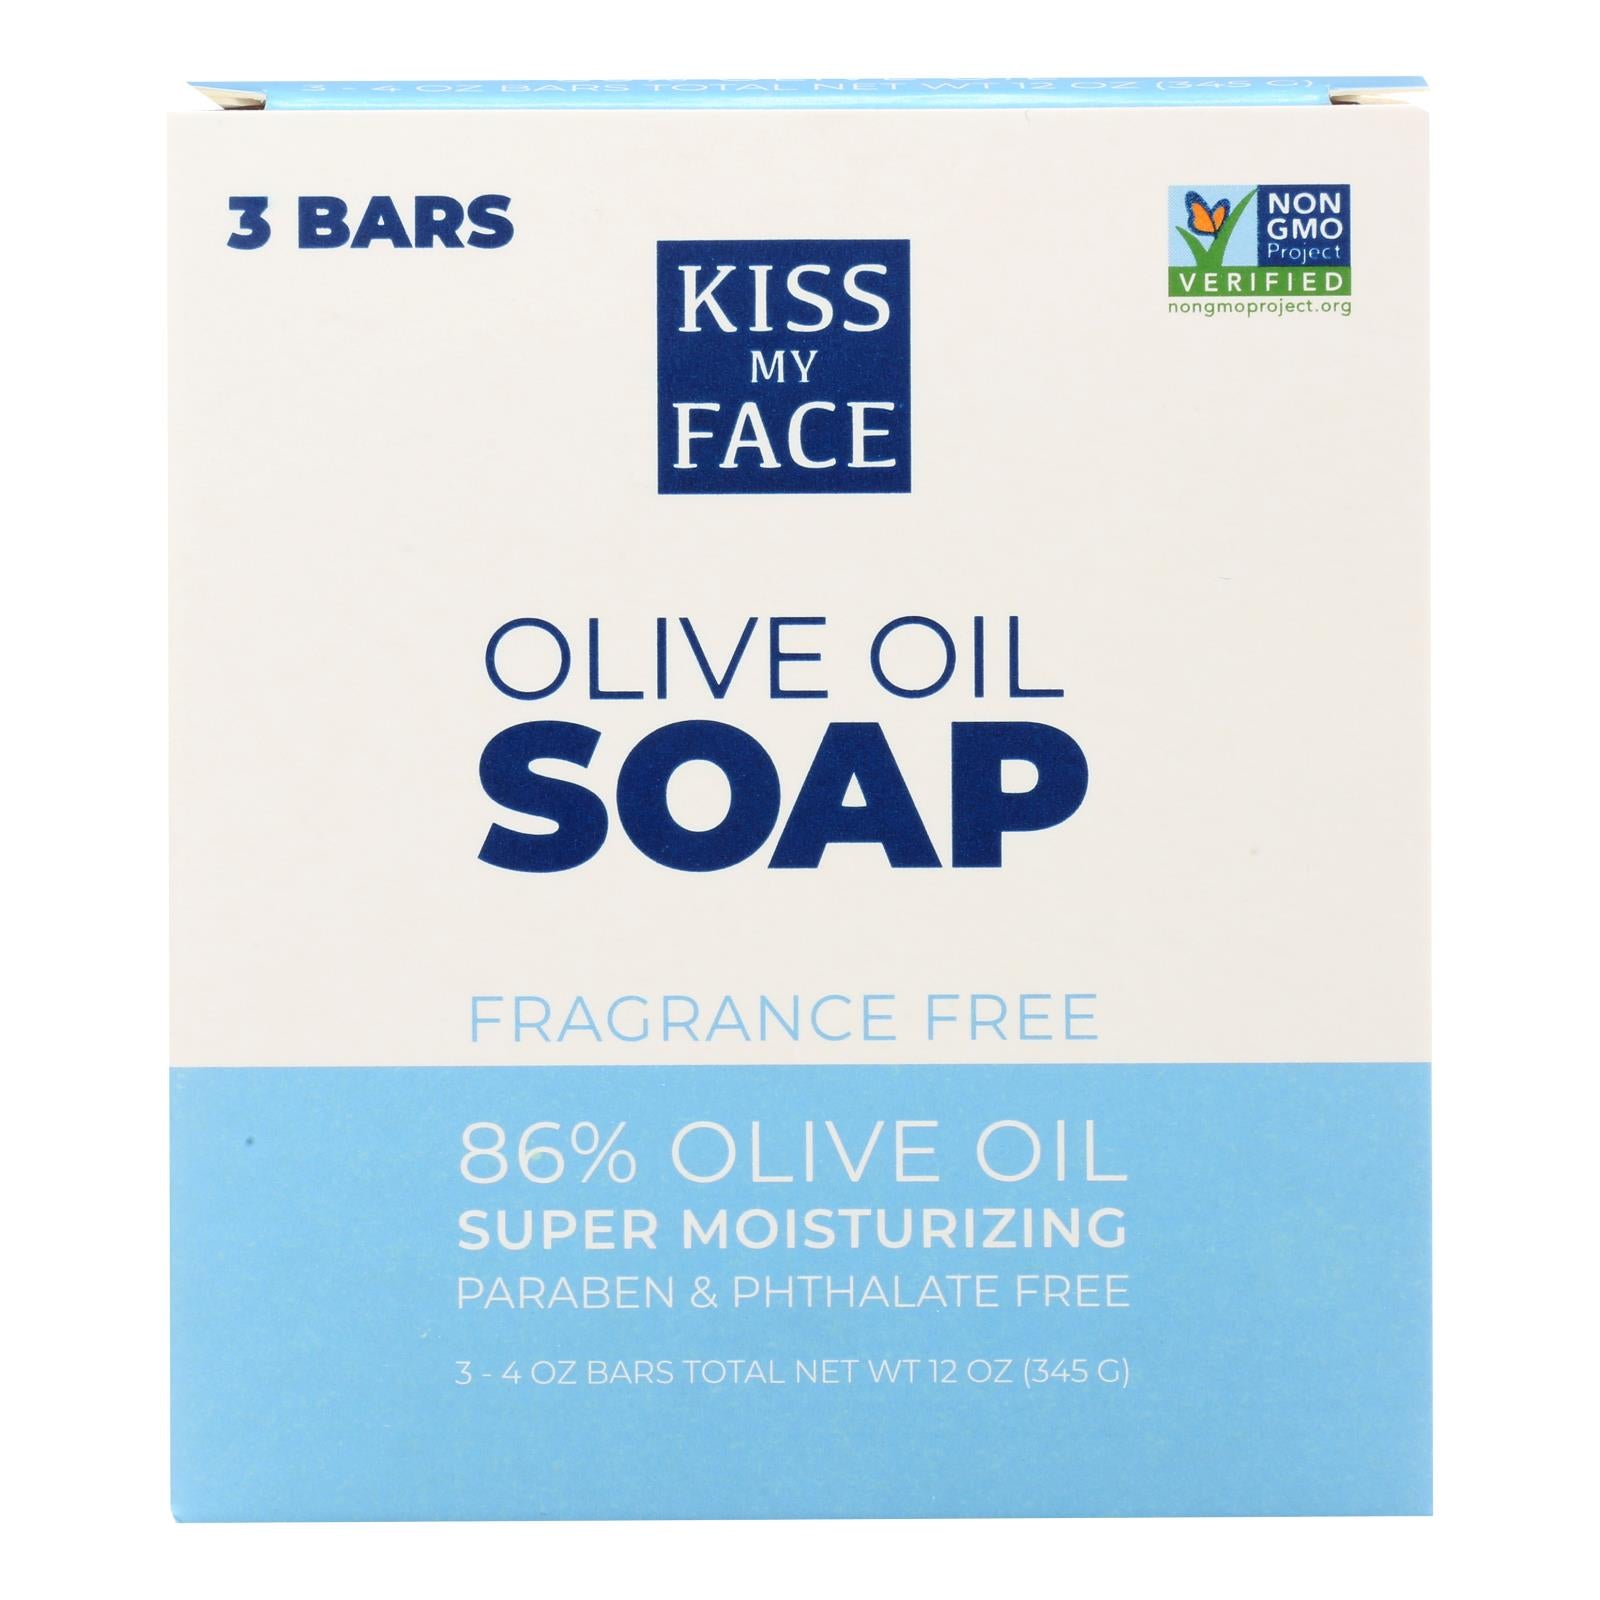 Kiss My Face Pure Olive Oil Moisturizing Soap - Pack of 3 - 4 oz